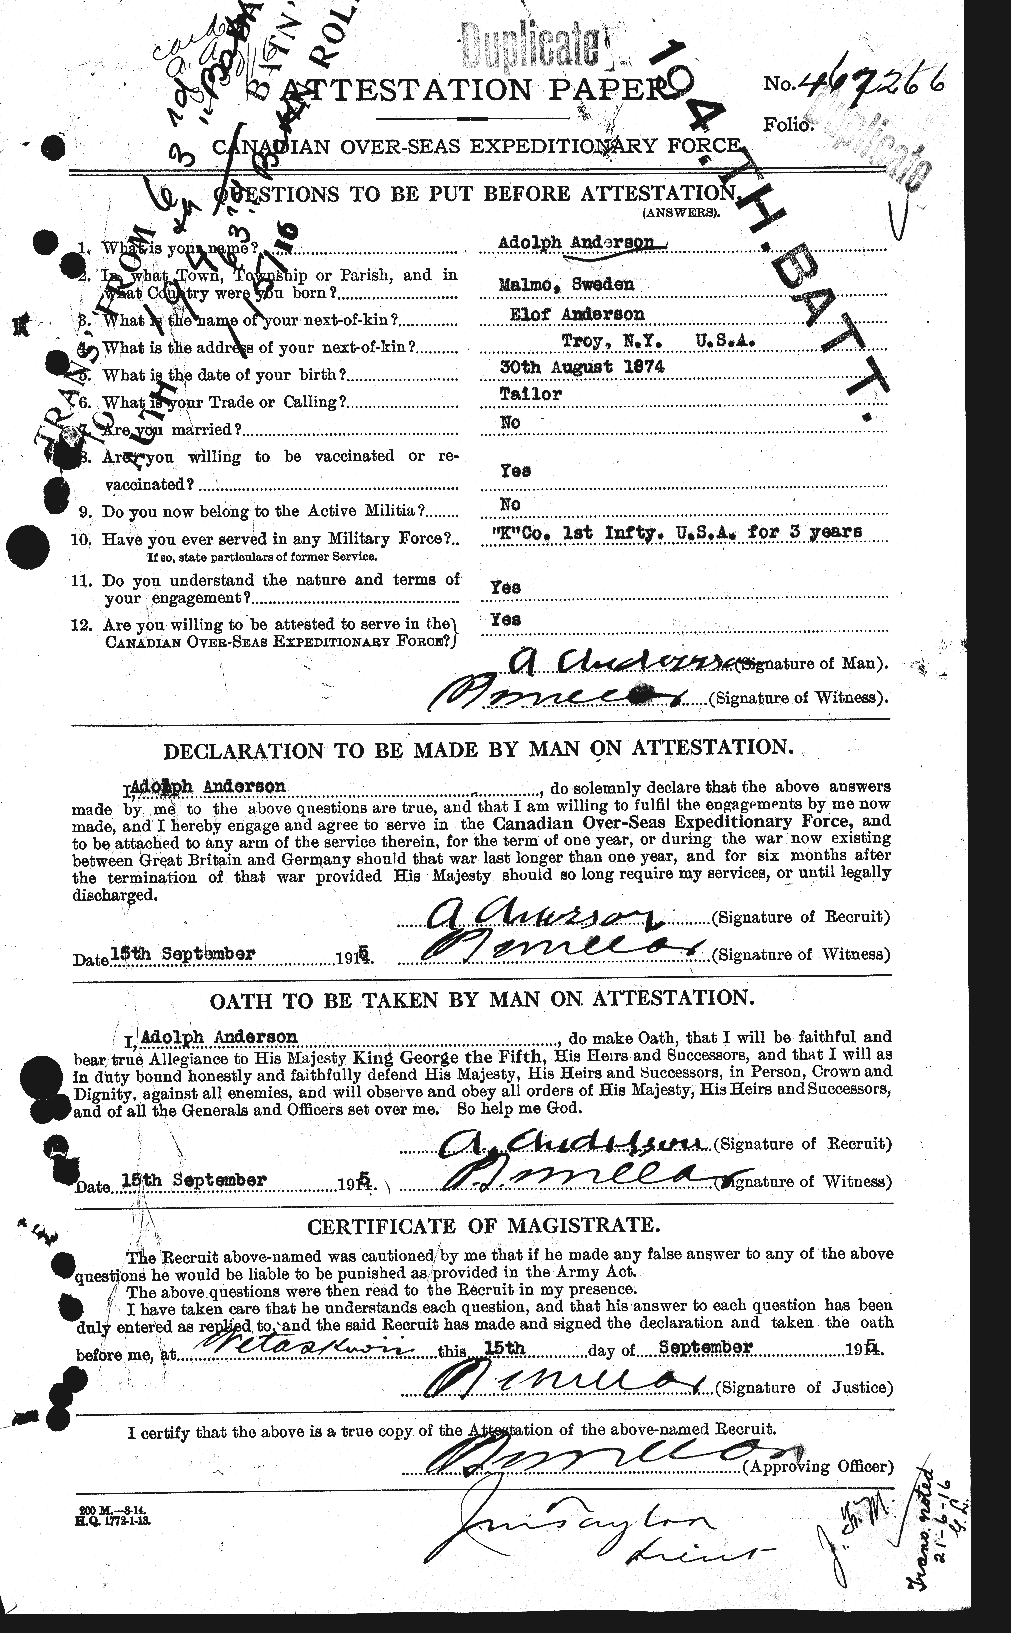 Personnel Records of the First World War - CEF 209575a